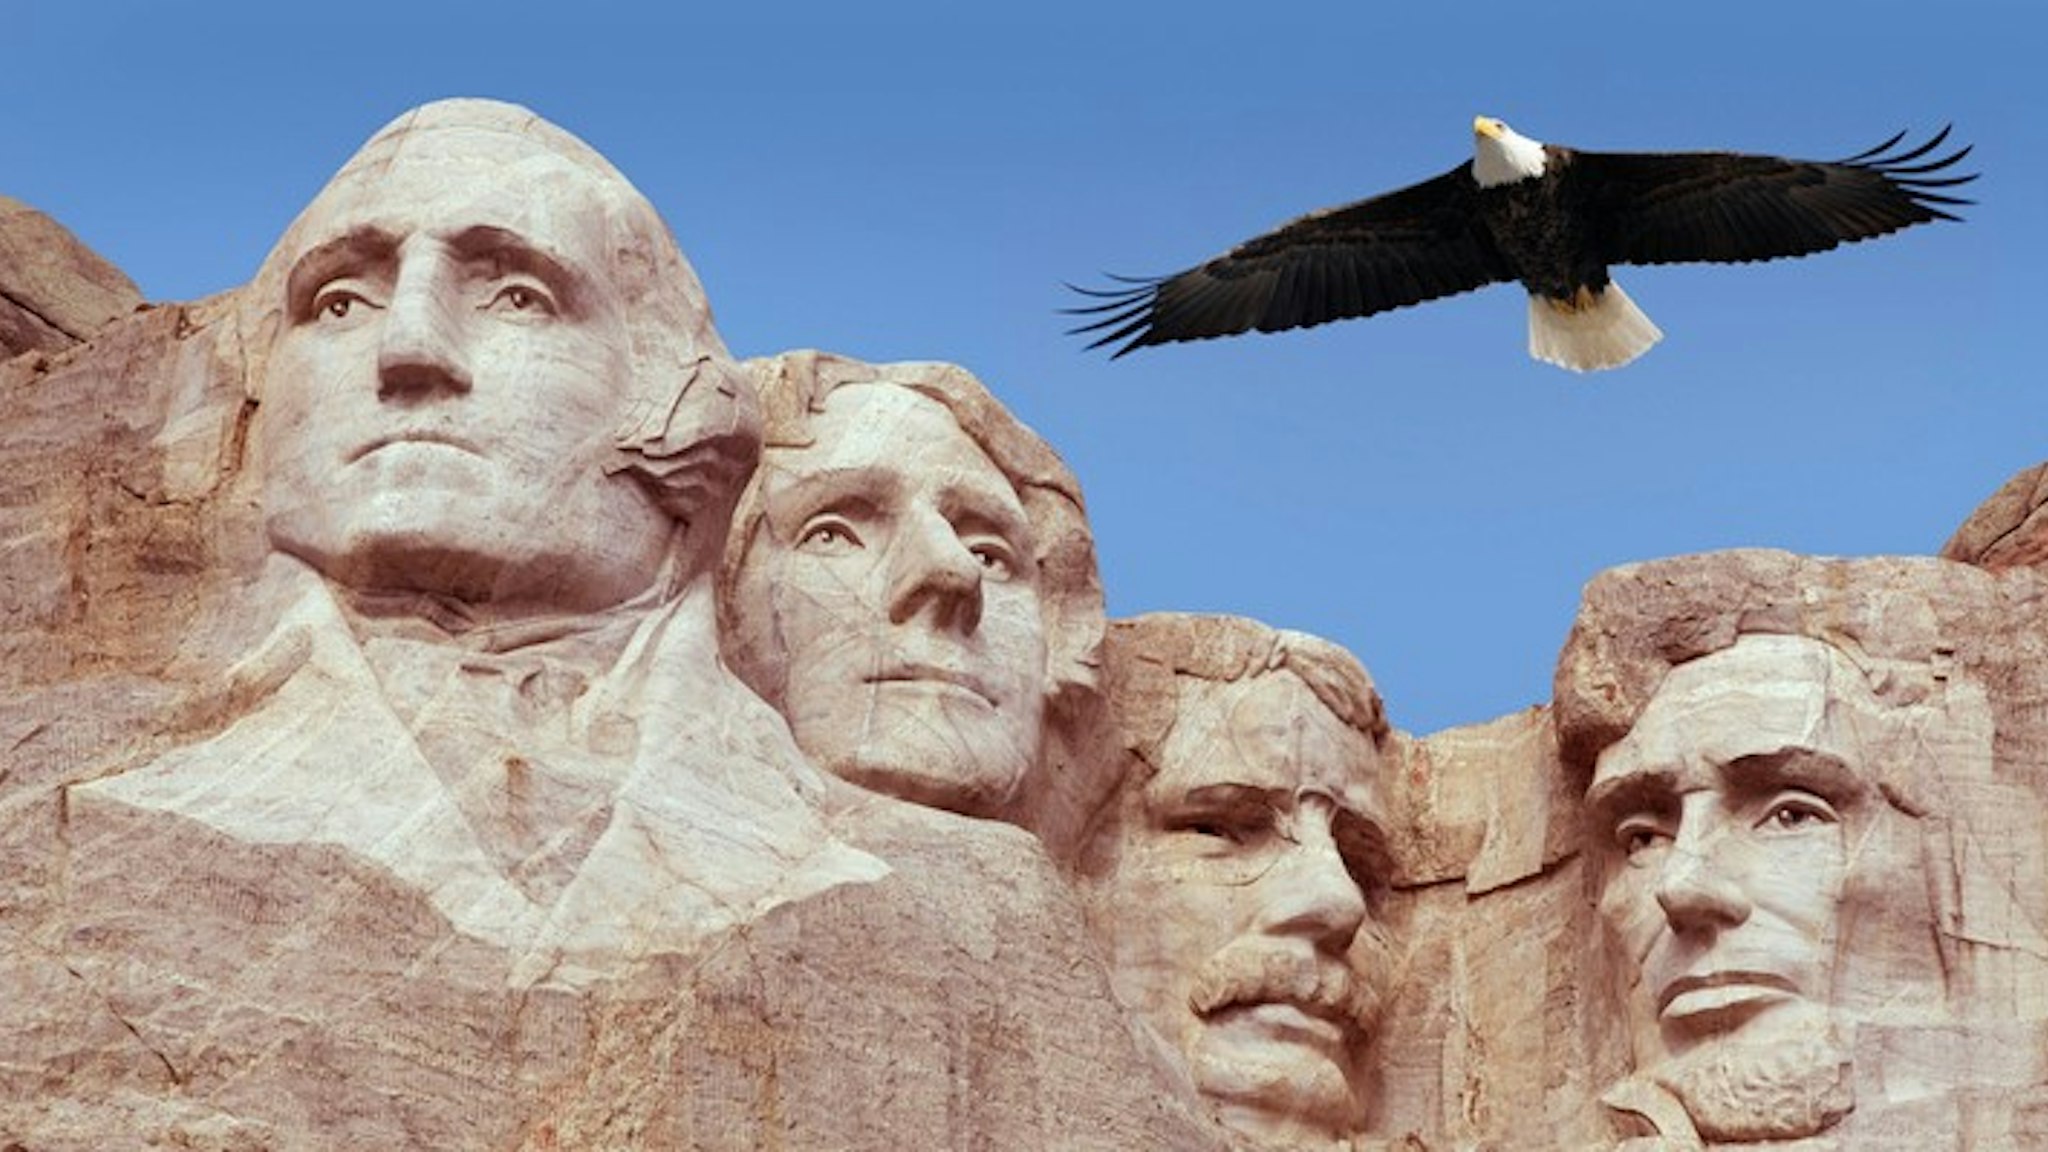 Bald Eagle Flying Free Above American Monument Mount Rushmore Presidents